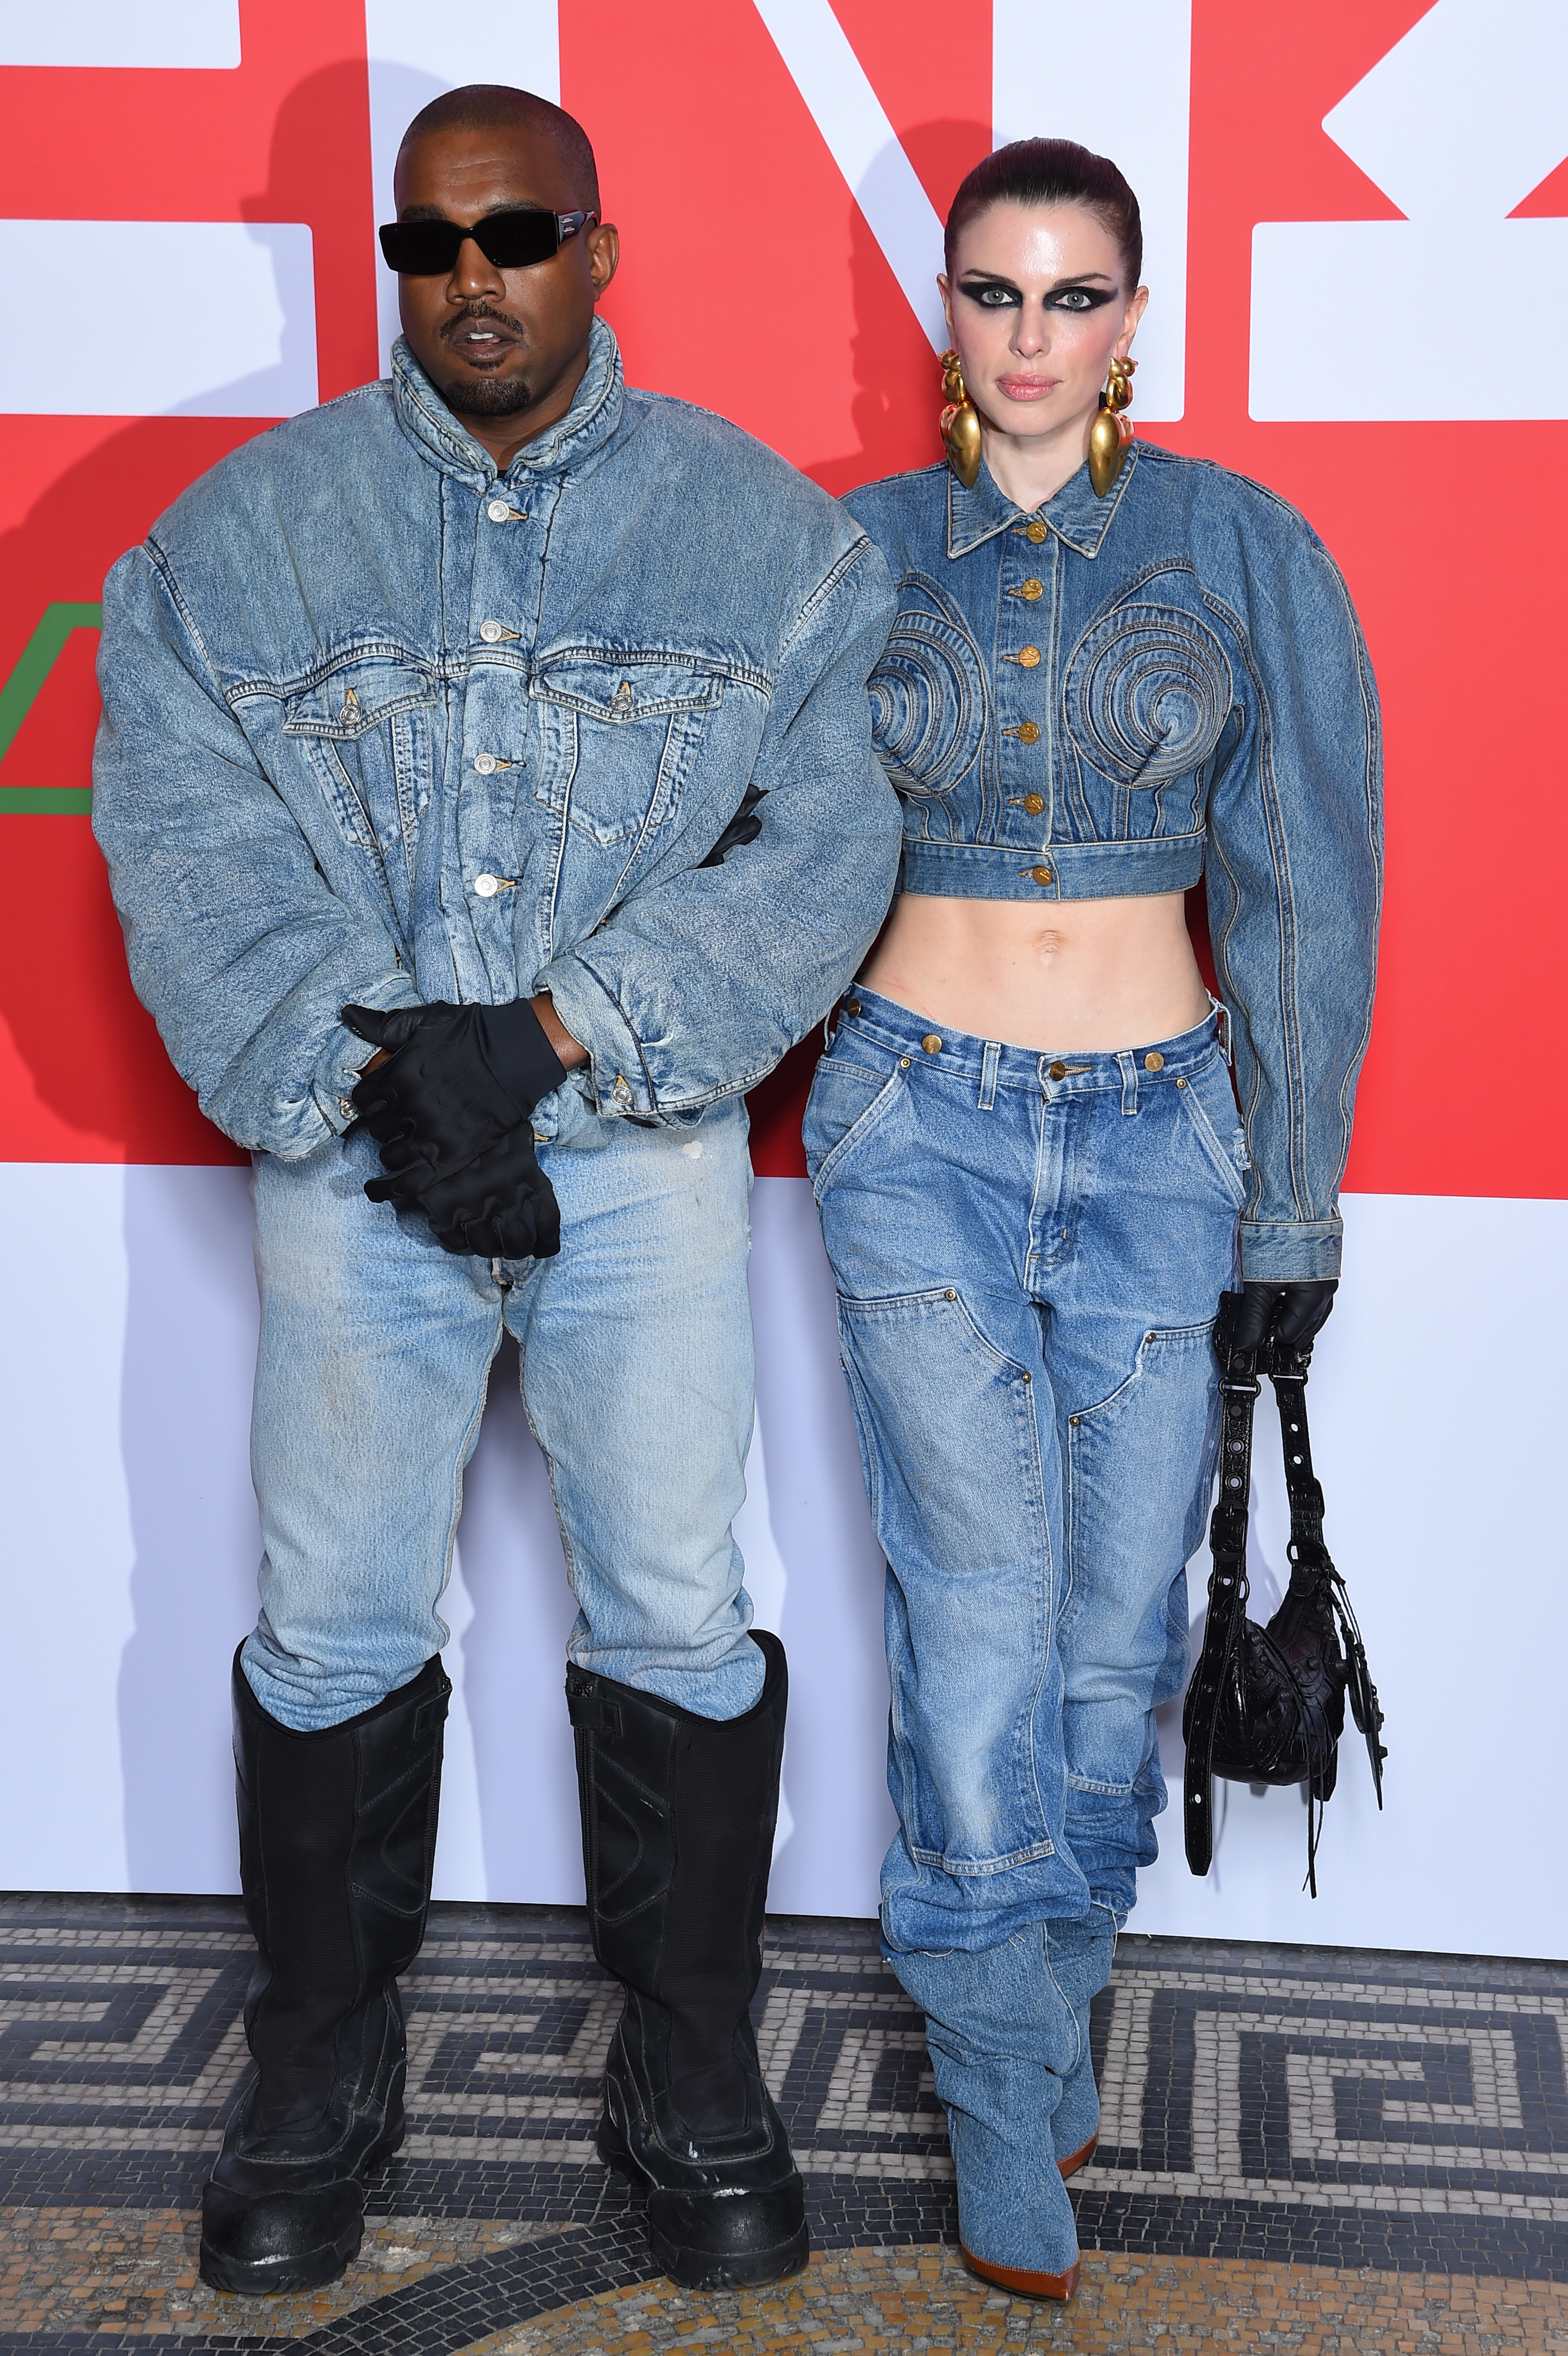 Kanye and Julia Fox posing together, they&#x27;re both wearing bonkers outfits that are denim from head to toe